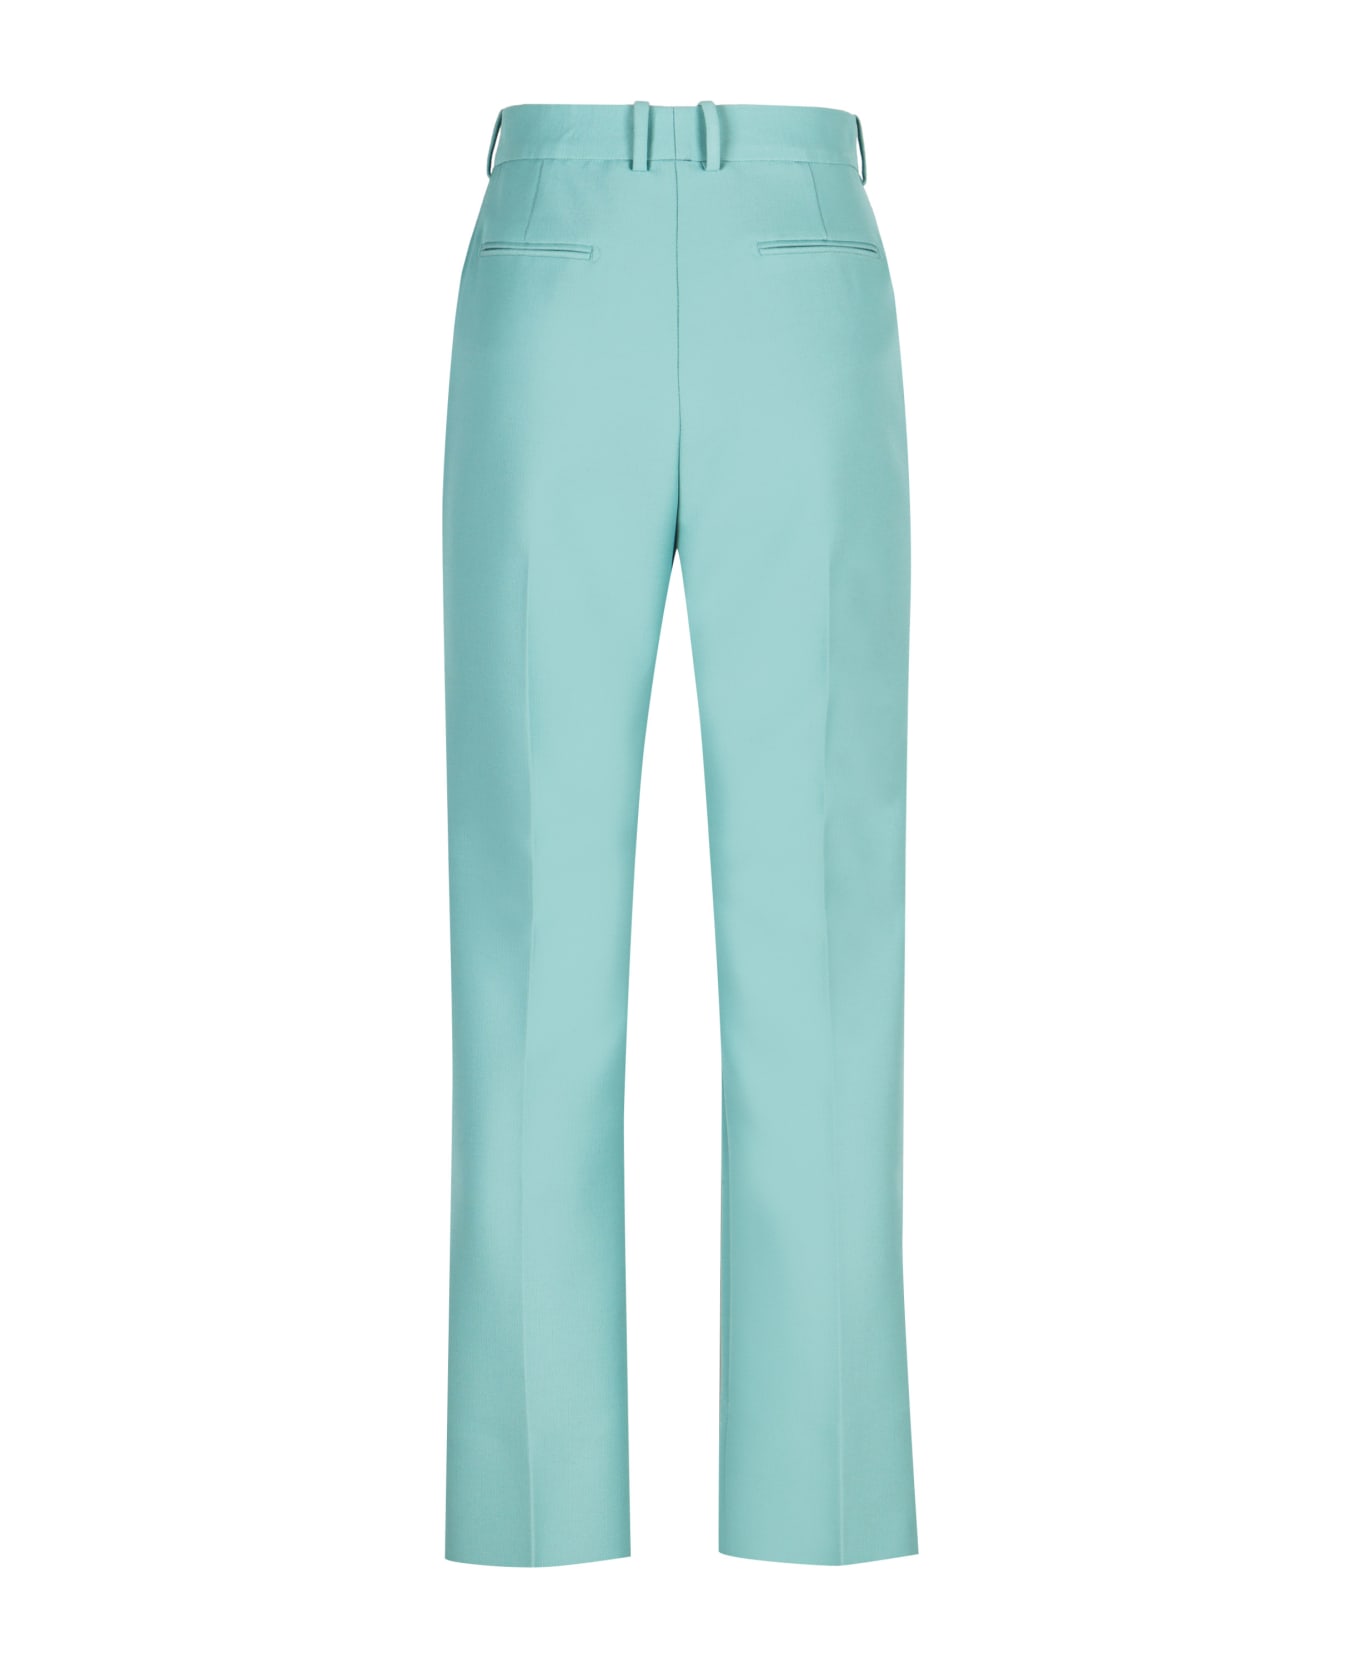 Tom Ford Wool Blend Trousers - Light Blue ボトムス